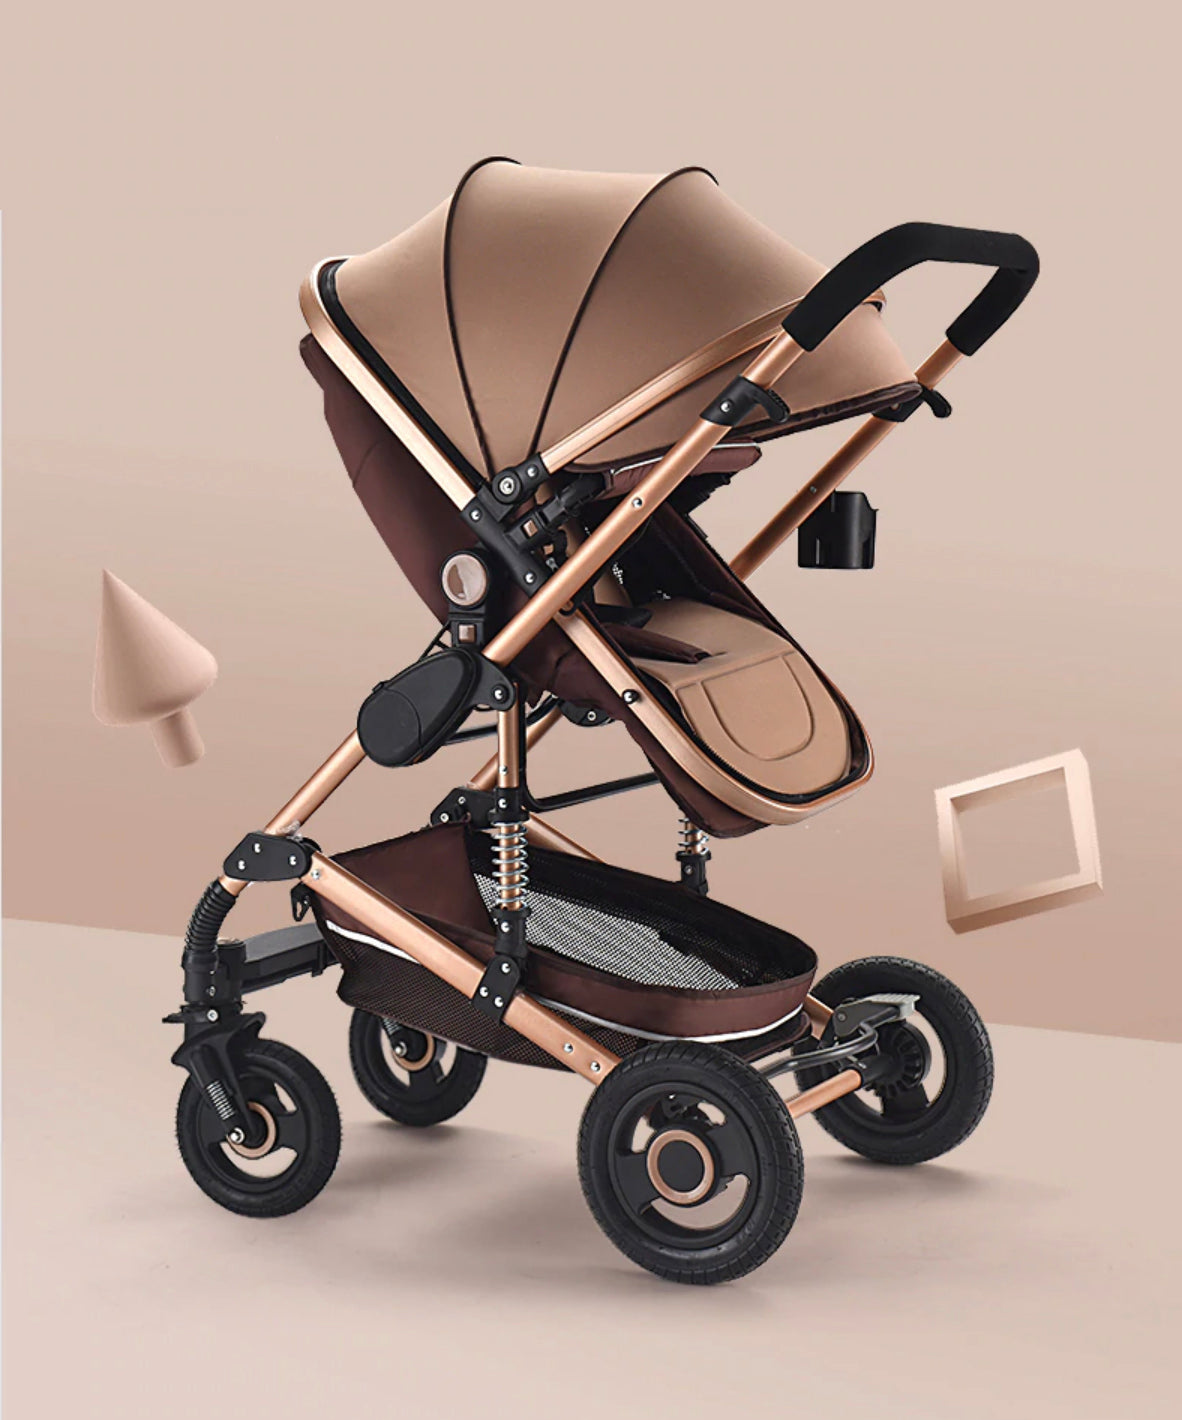 prams and pushchairs 3 in 1